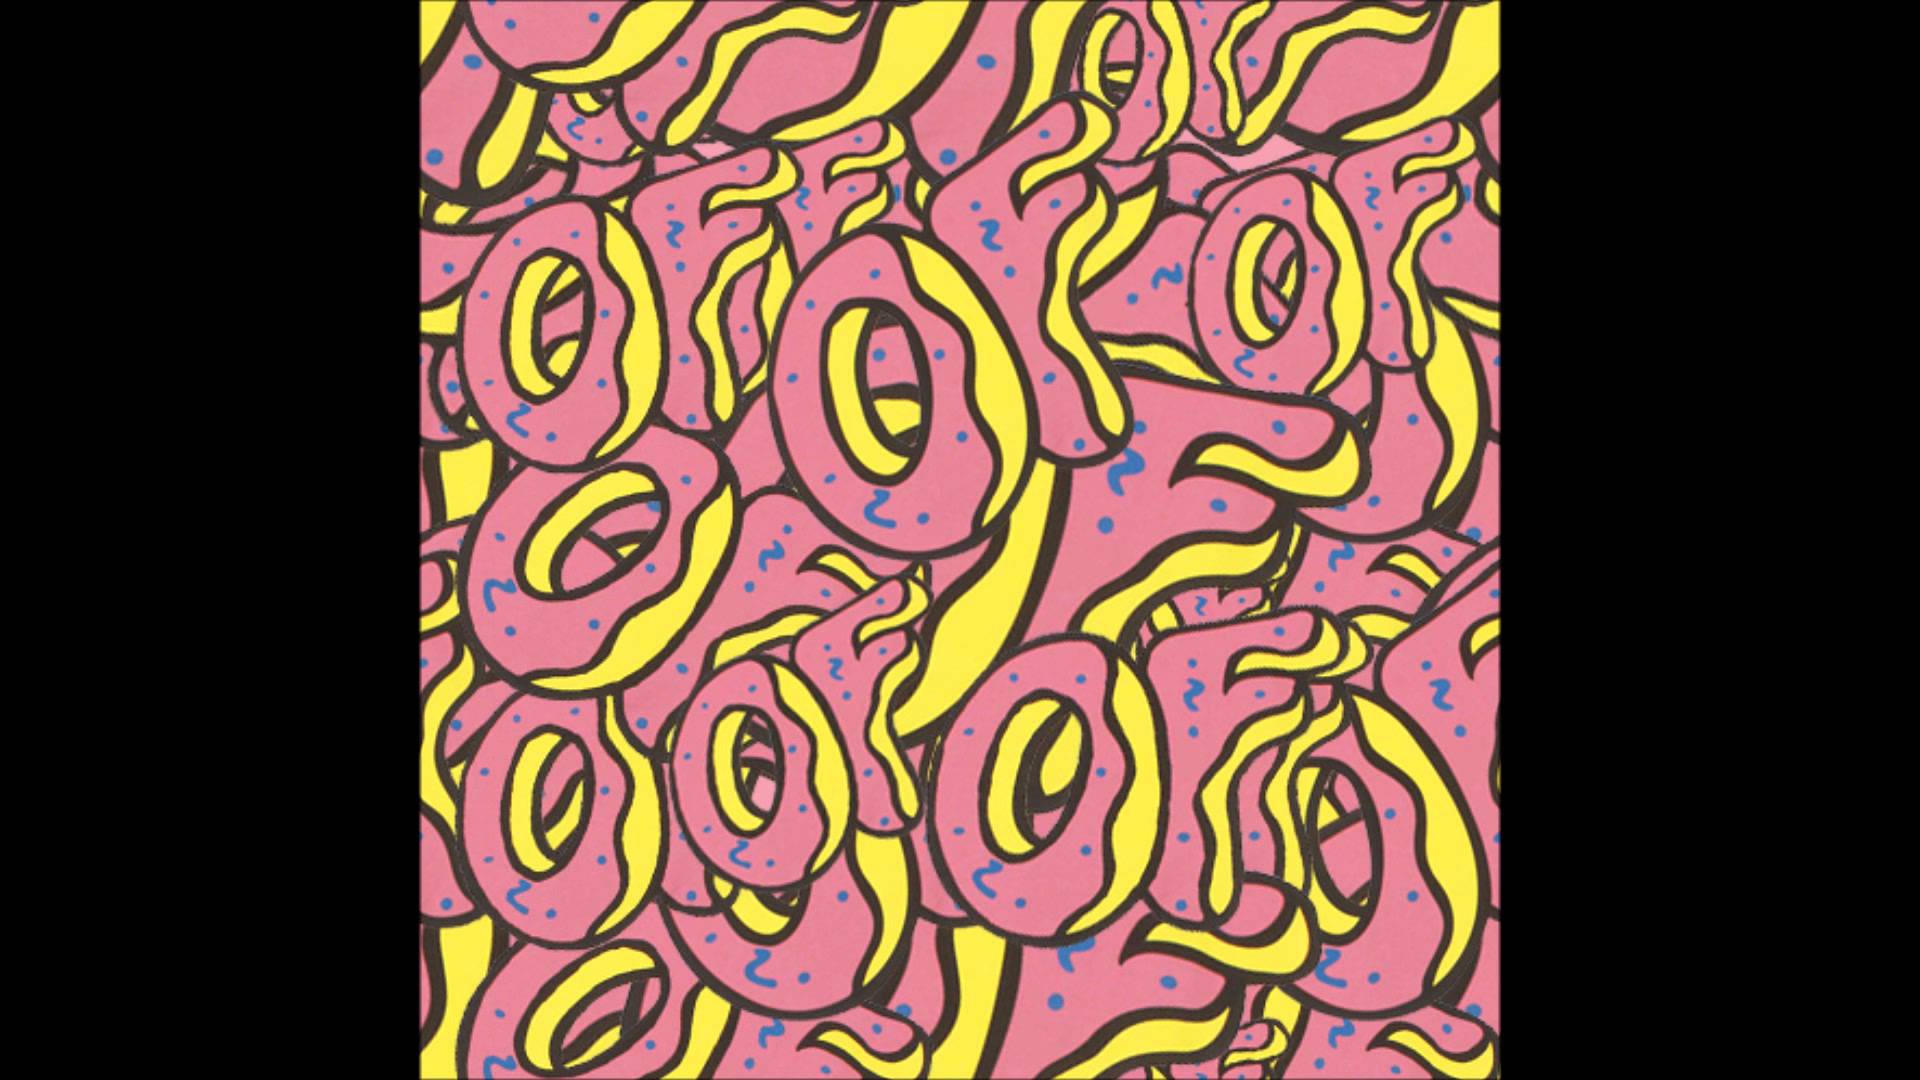 Displaying Image For Odd Future Donut Wallpaper